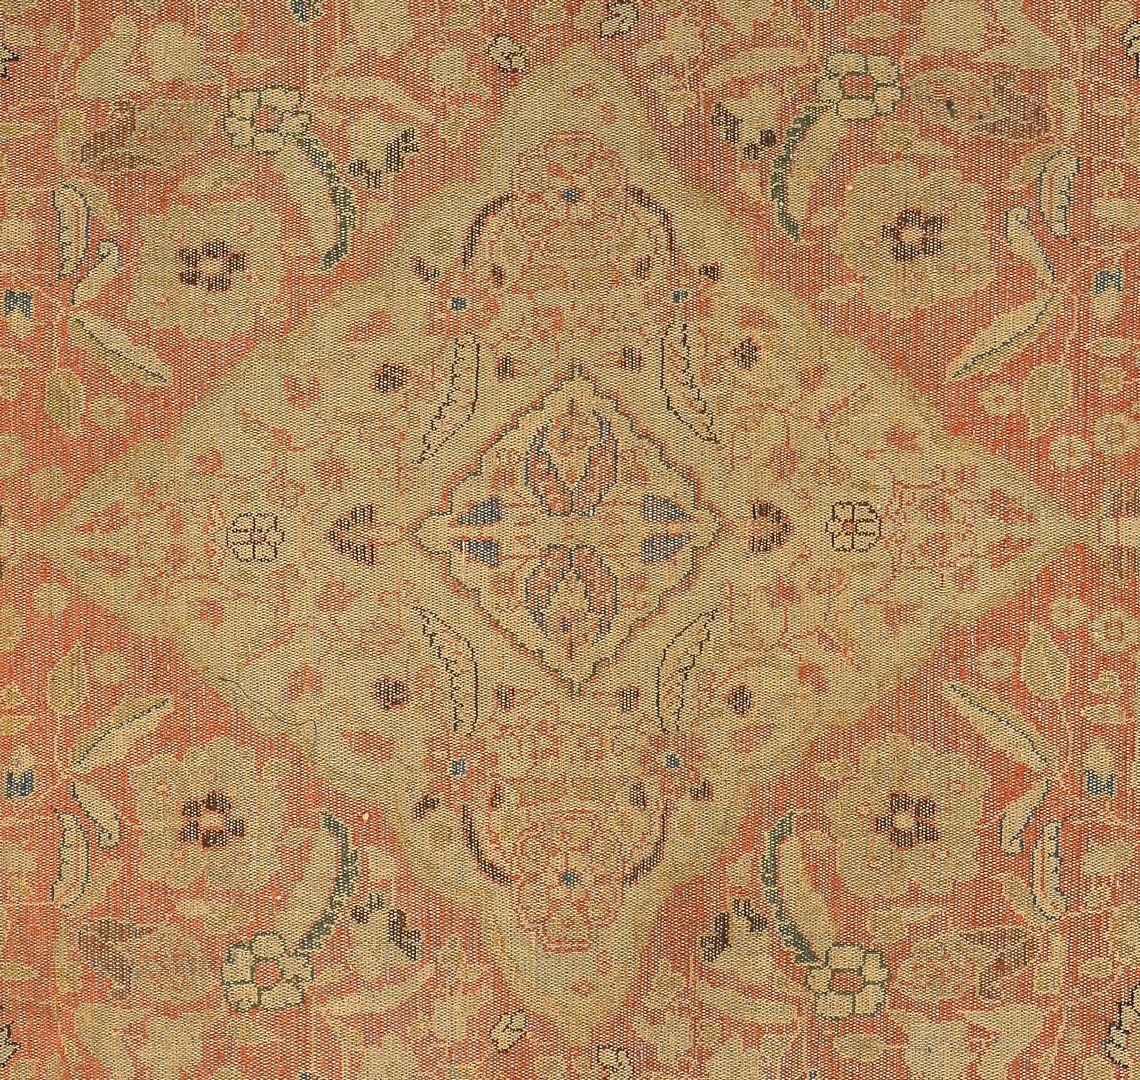 Lot 244: Mission Malayer rug, late 19th c.